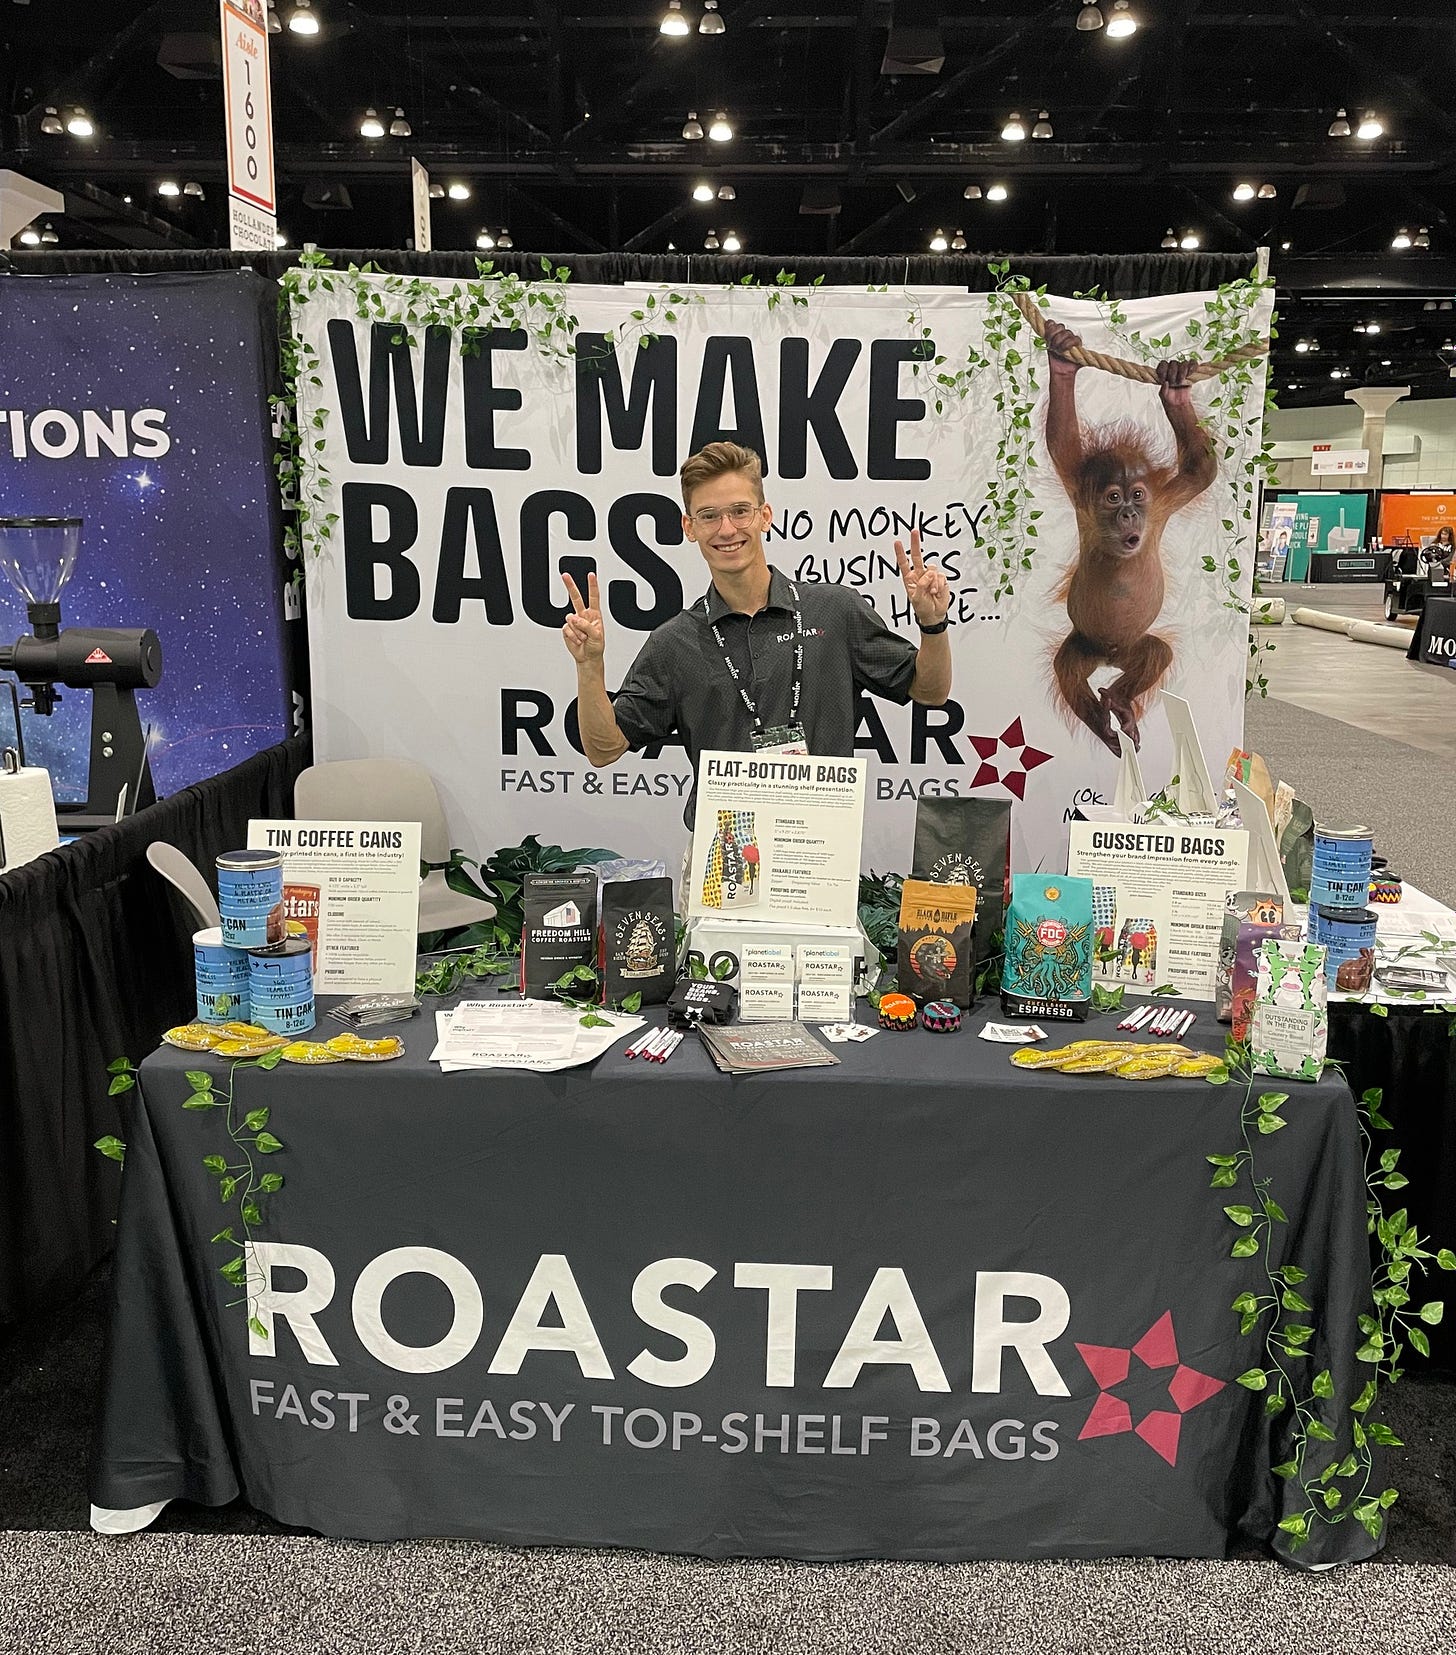 A salesman flashes the peace sign with his fingers while standing behind a table loaded with sample coffee bags and merchandise at a trade show.